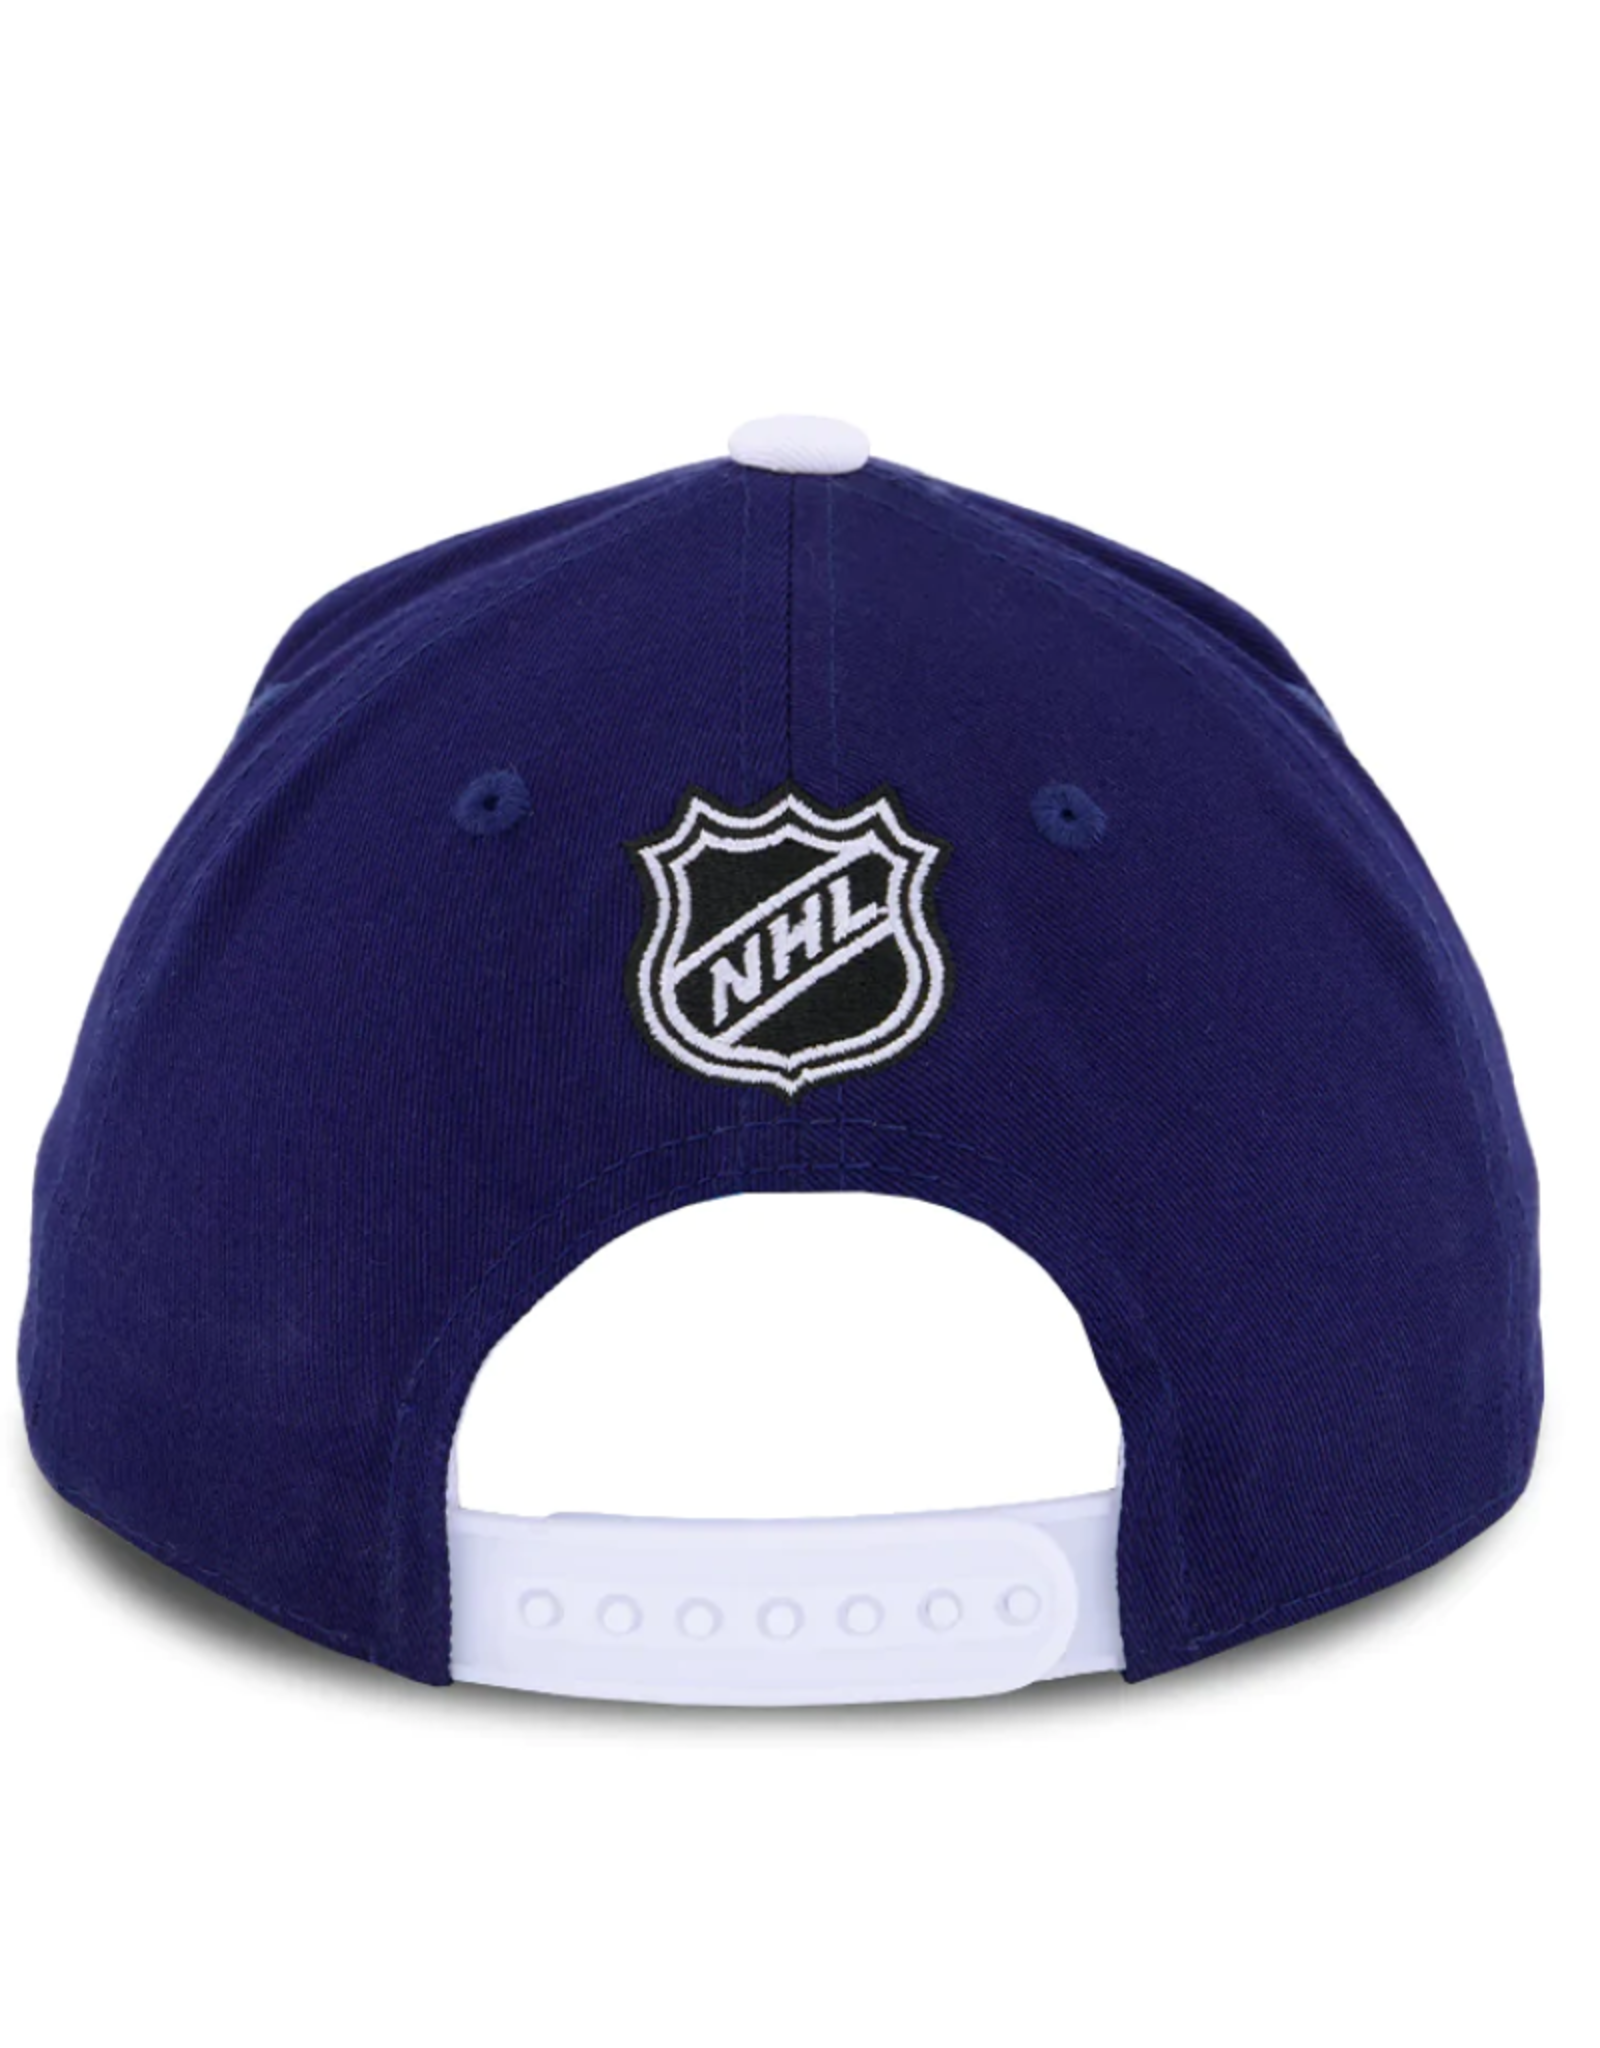 Outerstuff Youth Precurve Snapback Hat Toronto Maple Leafs